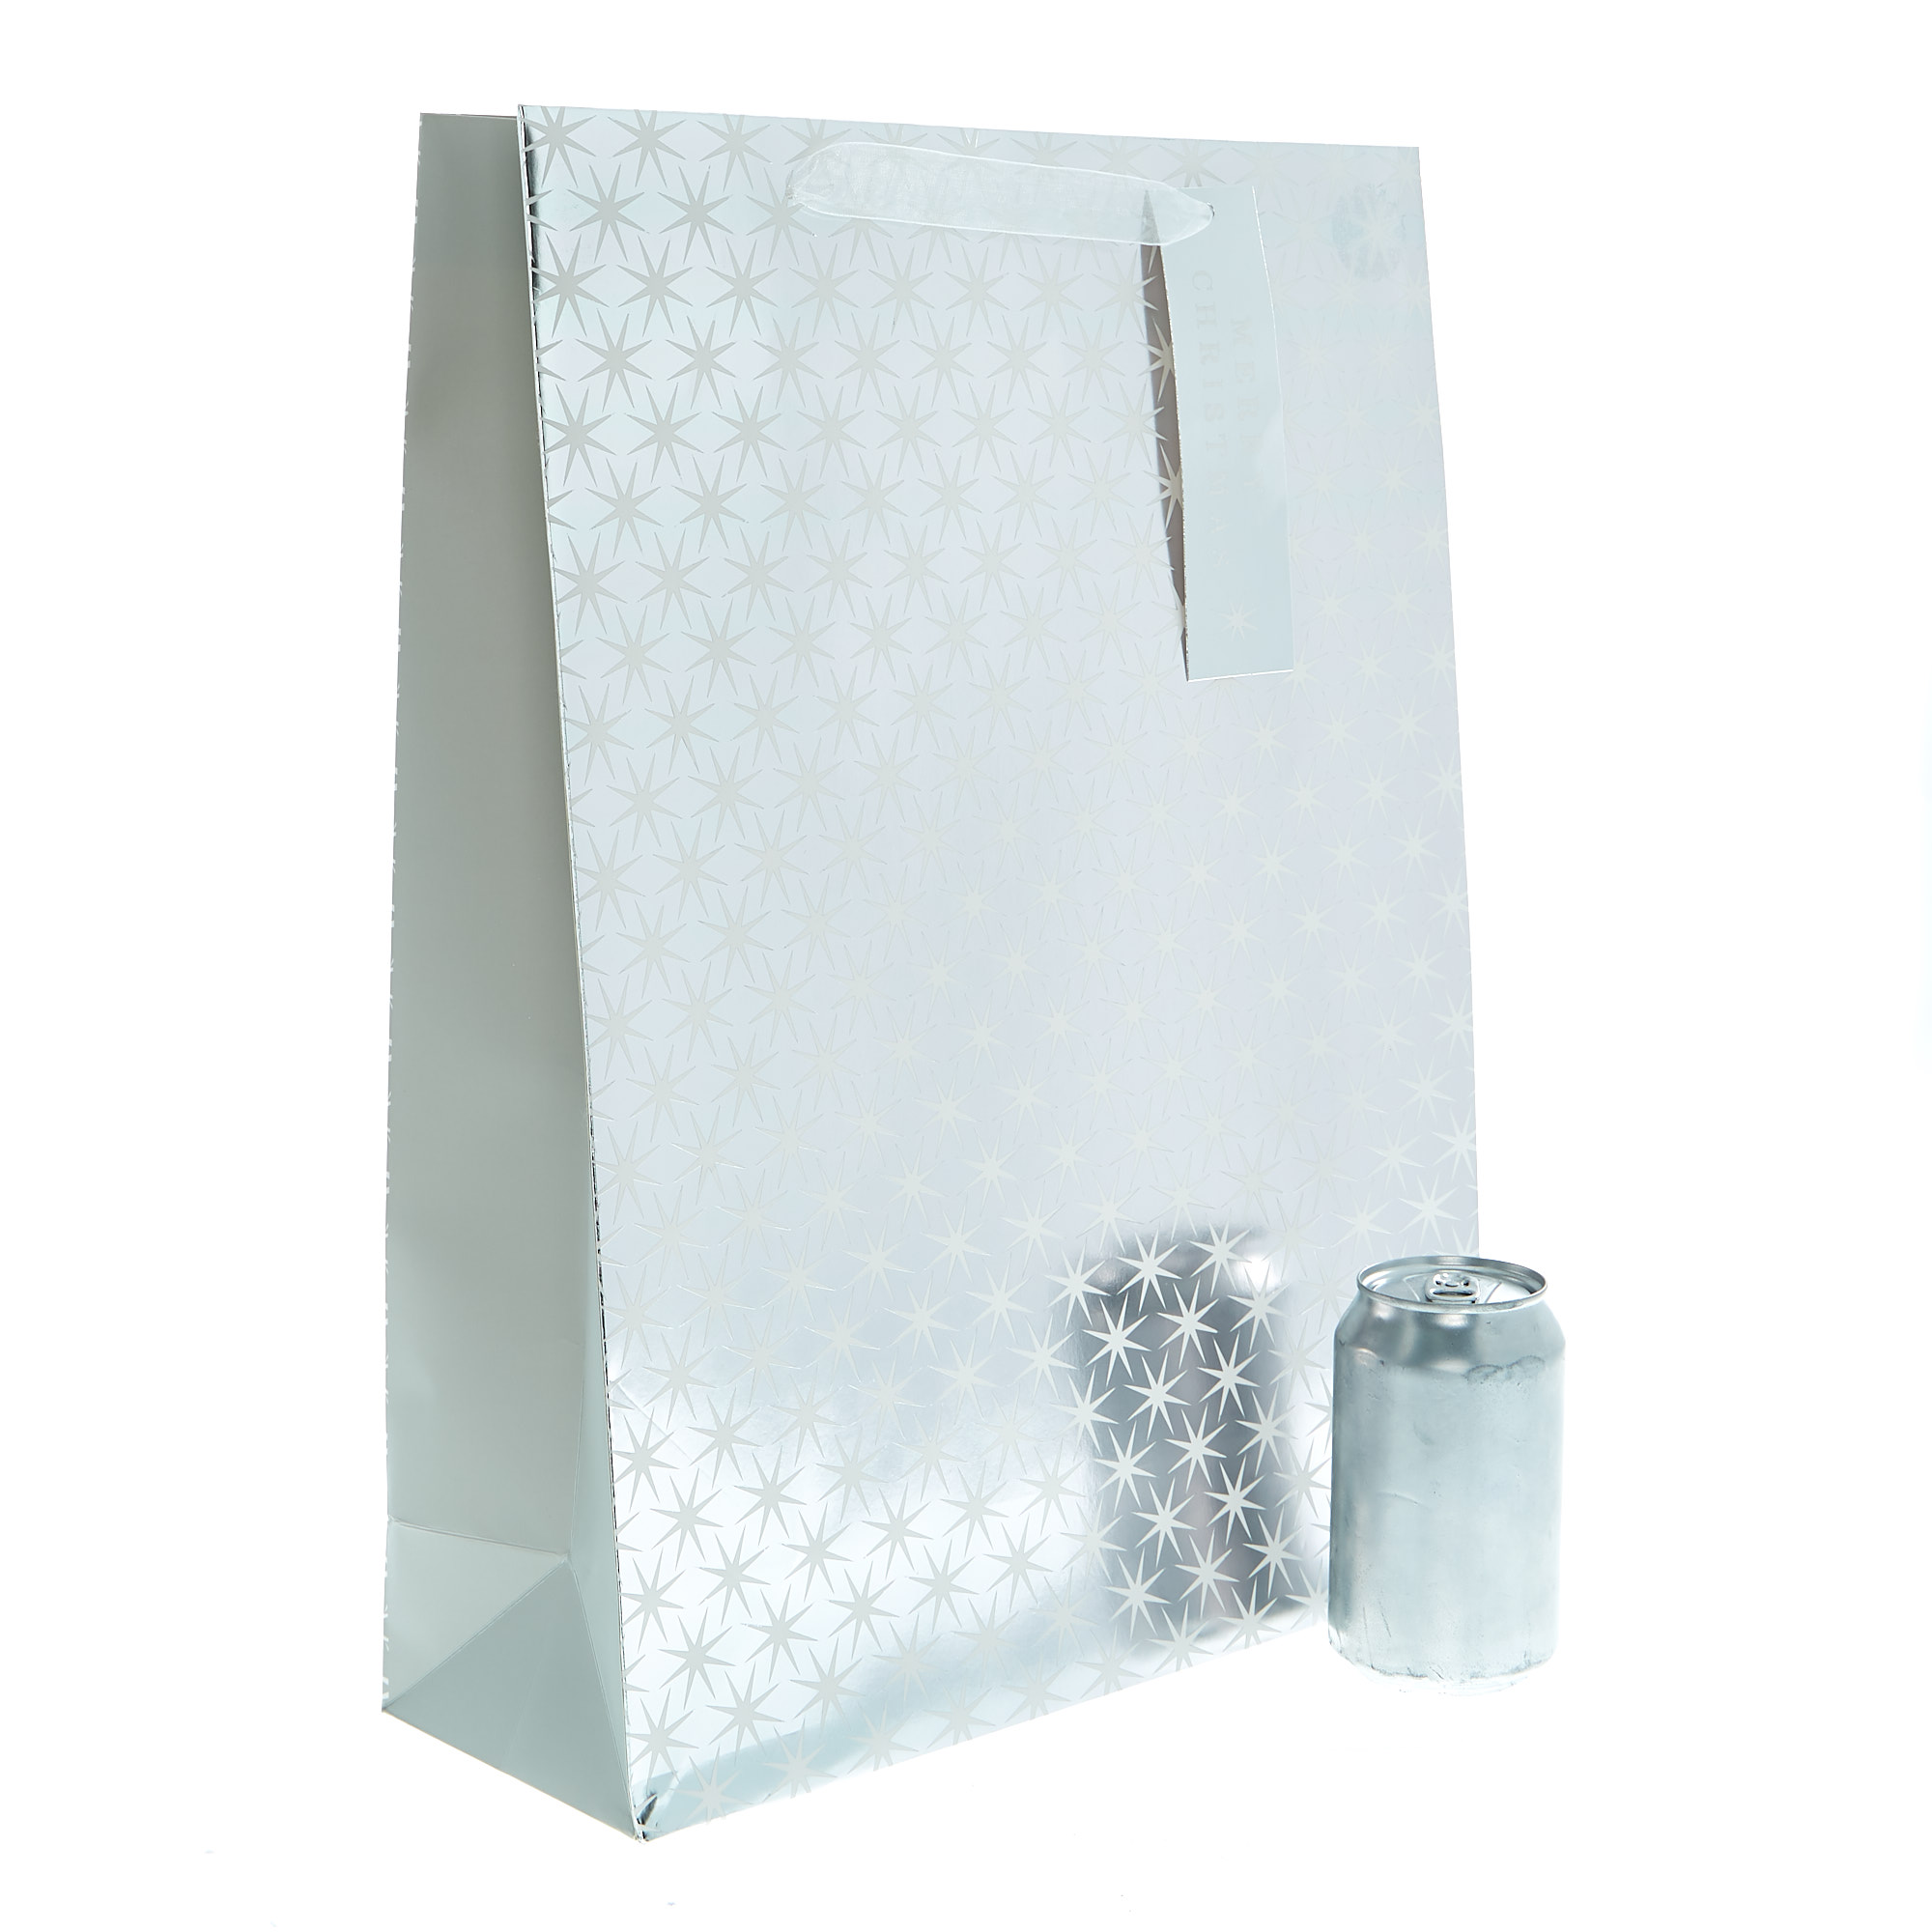 Extra Large Portrait White & Silver Stars Christmas Gift Bag